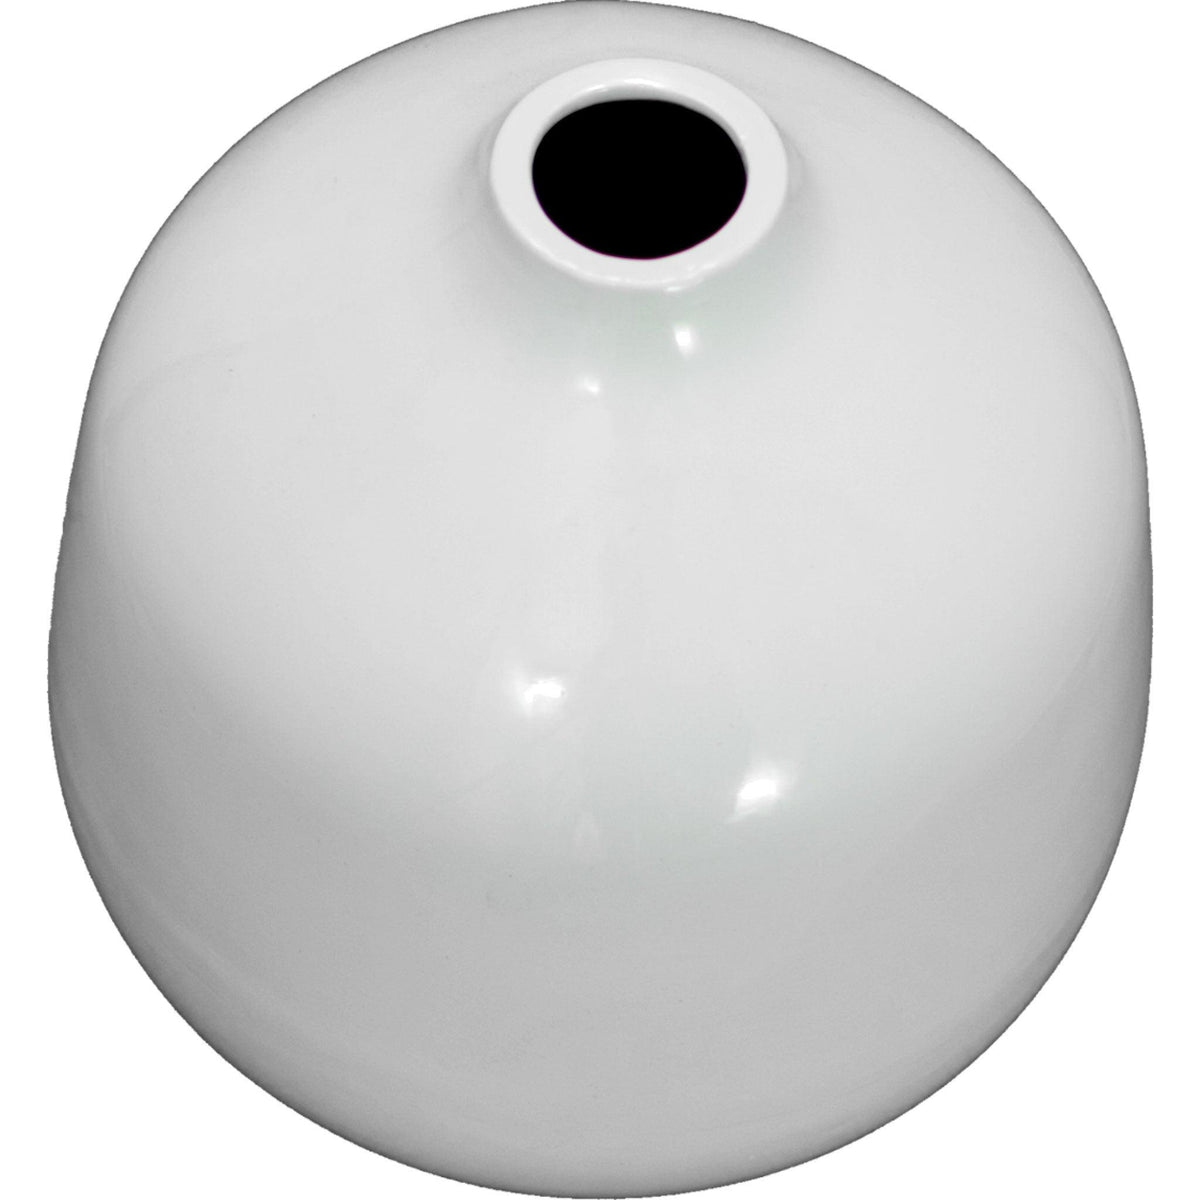 Lee Display's brand new 8in Bell Krater Ceramic Vase comes in a high gloss white finish on sale at leedisplay.com